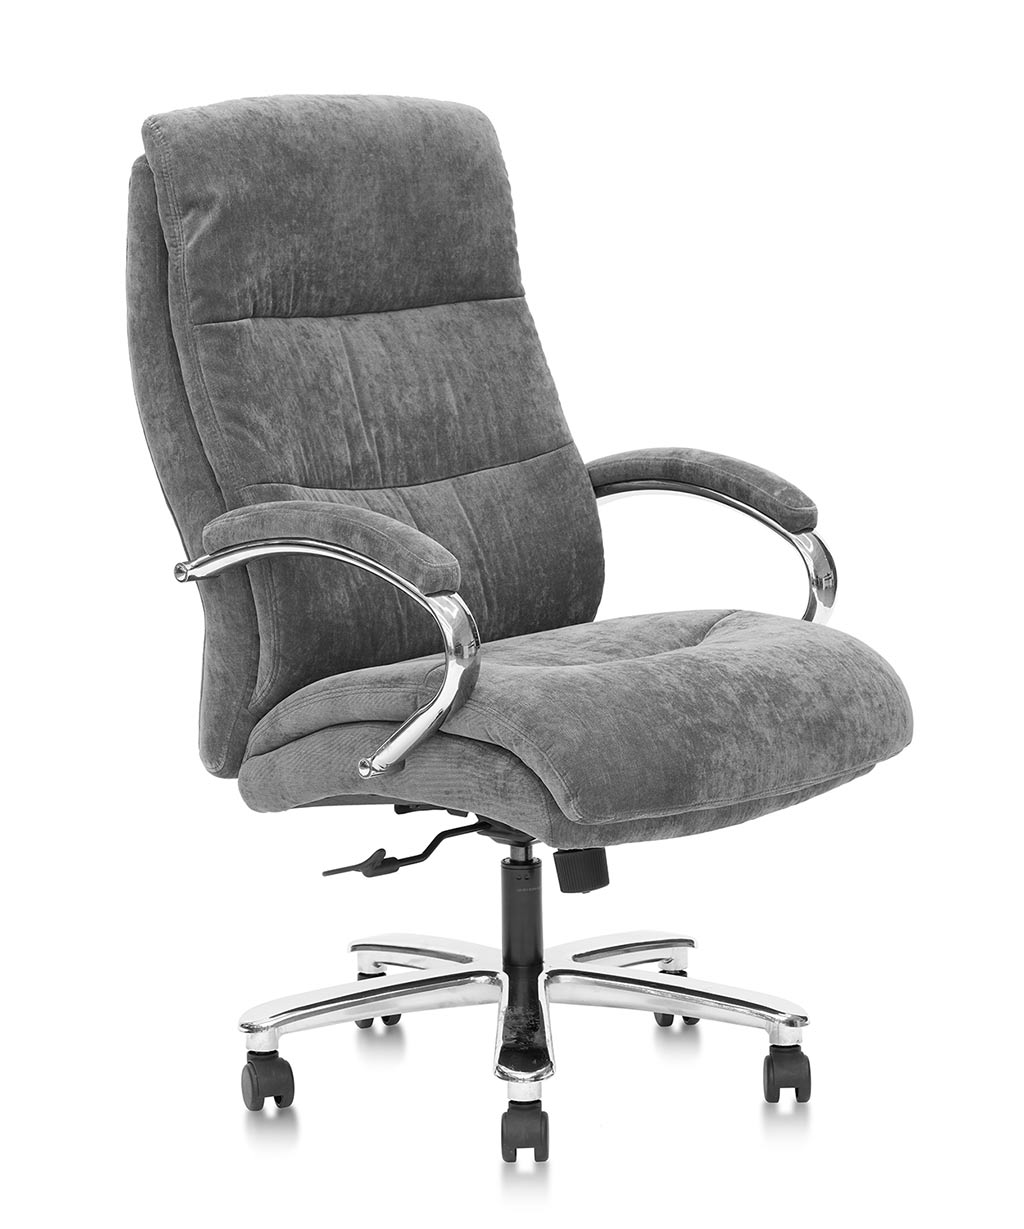 Big&Tall Executive Office Chair High Back Leather Office Chair